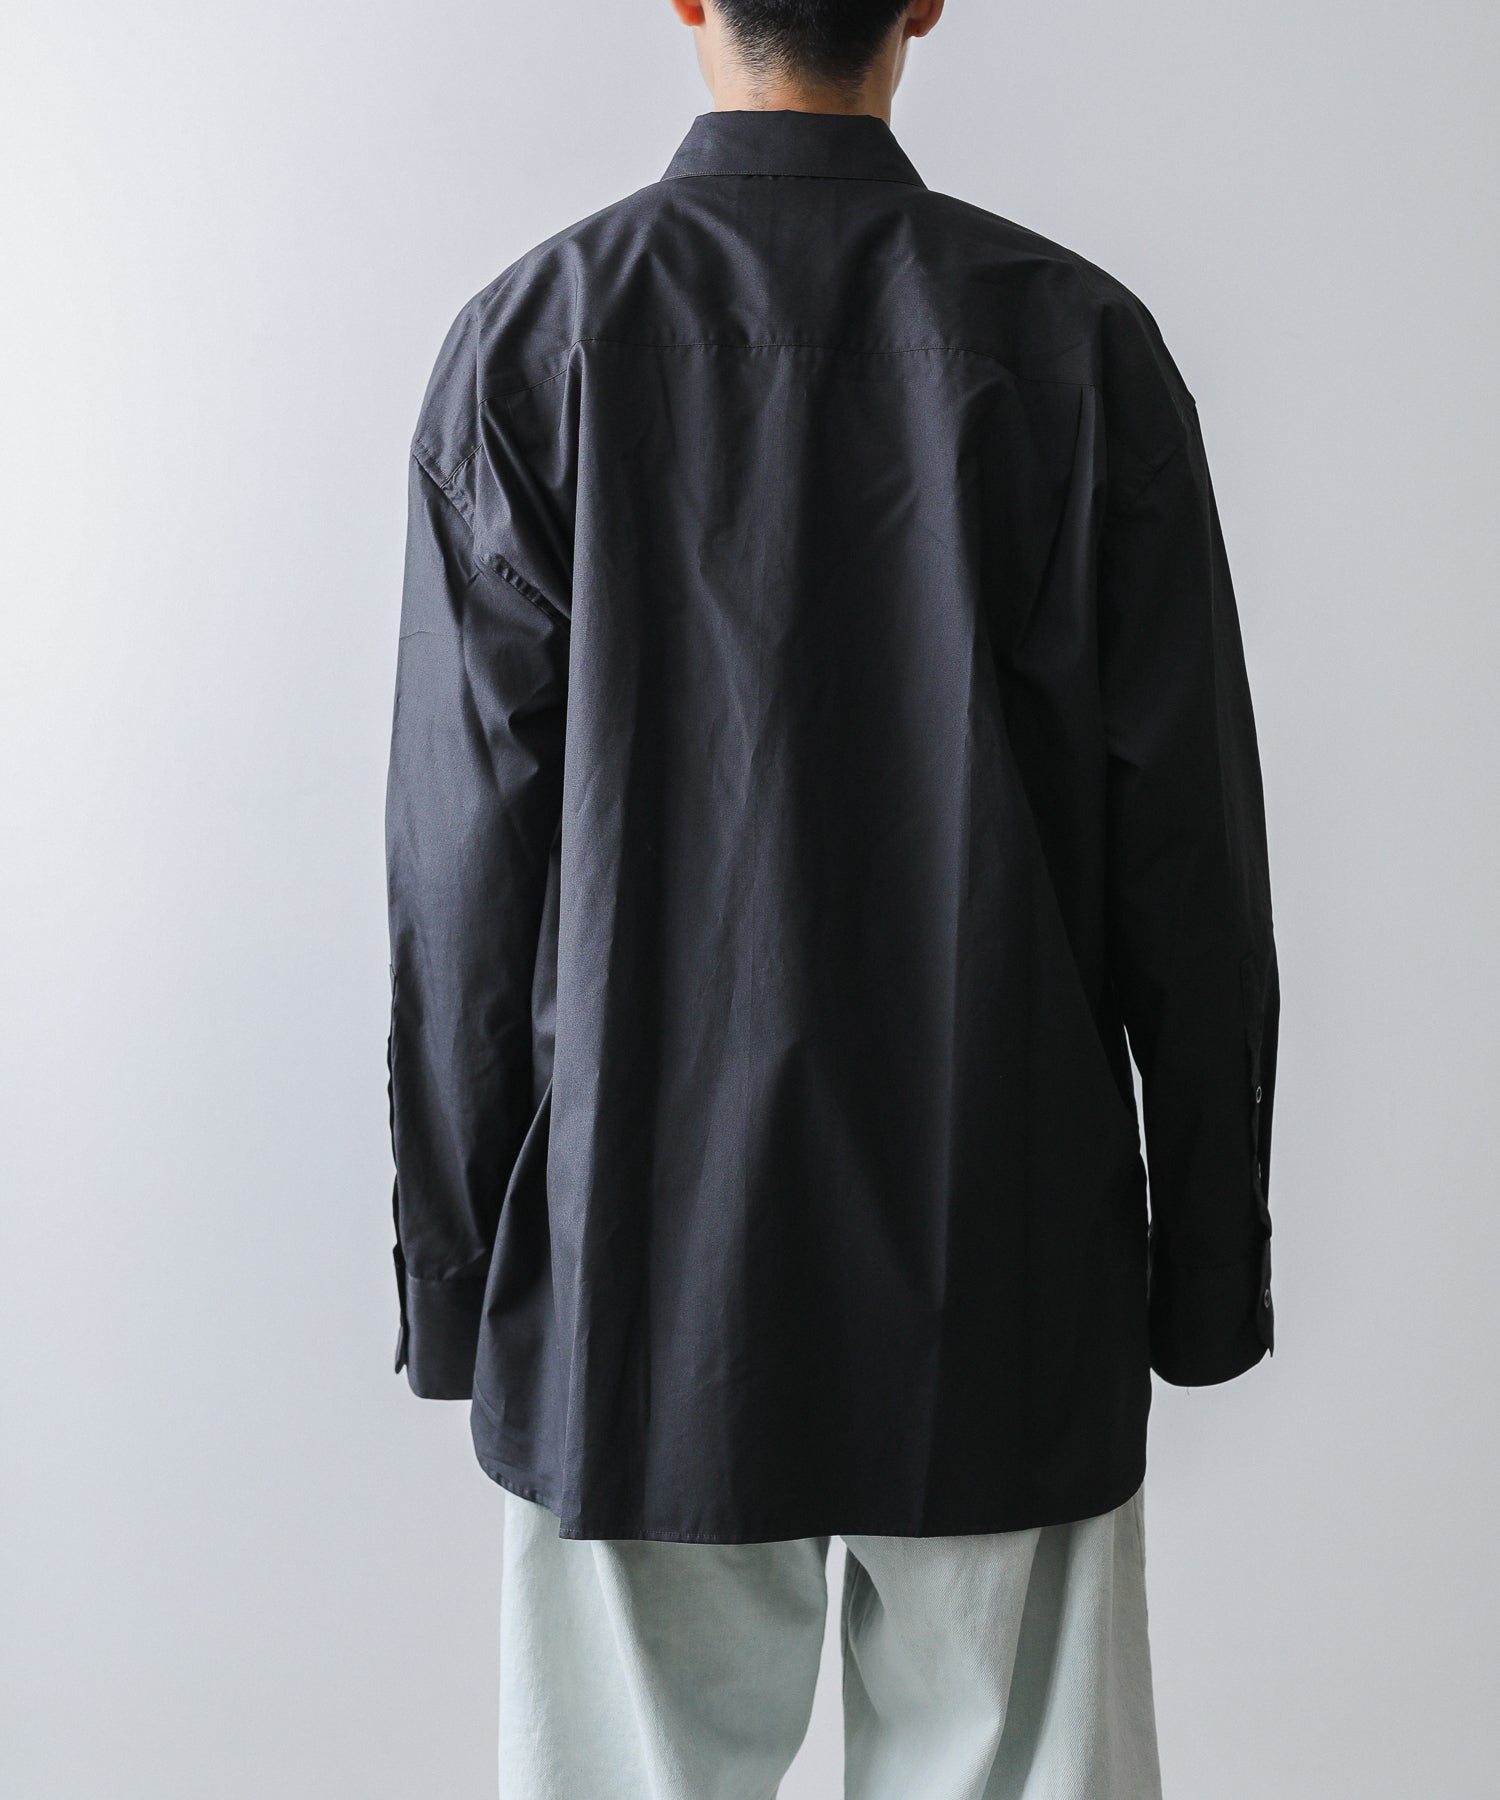 【stein】OVERSIZED DOWN PAT SHIRT - CHARCOAL